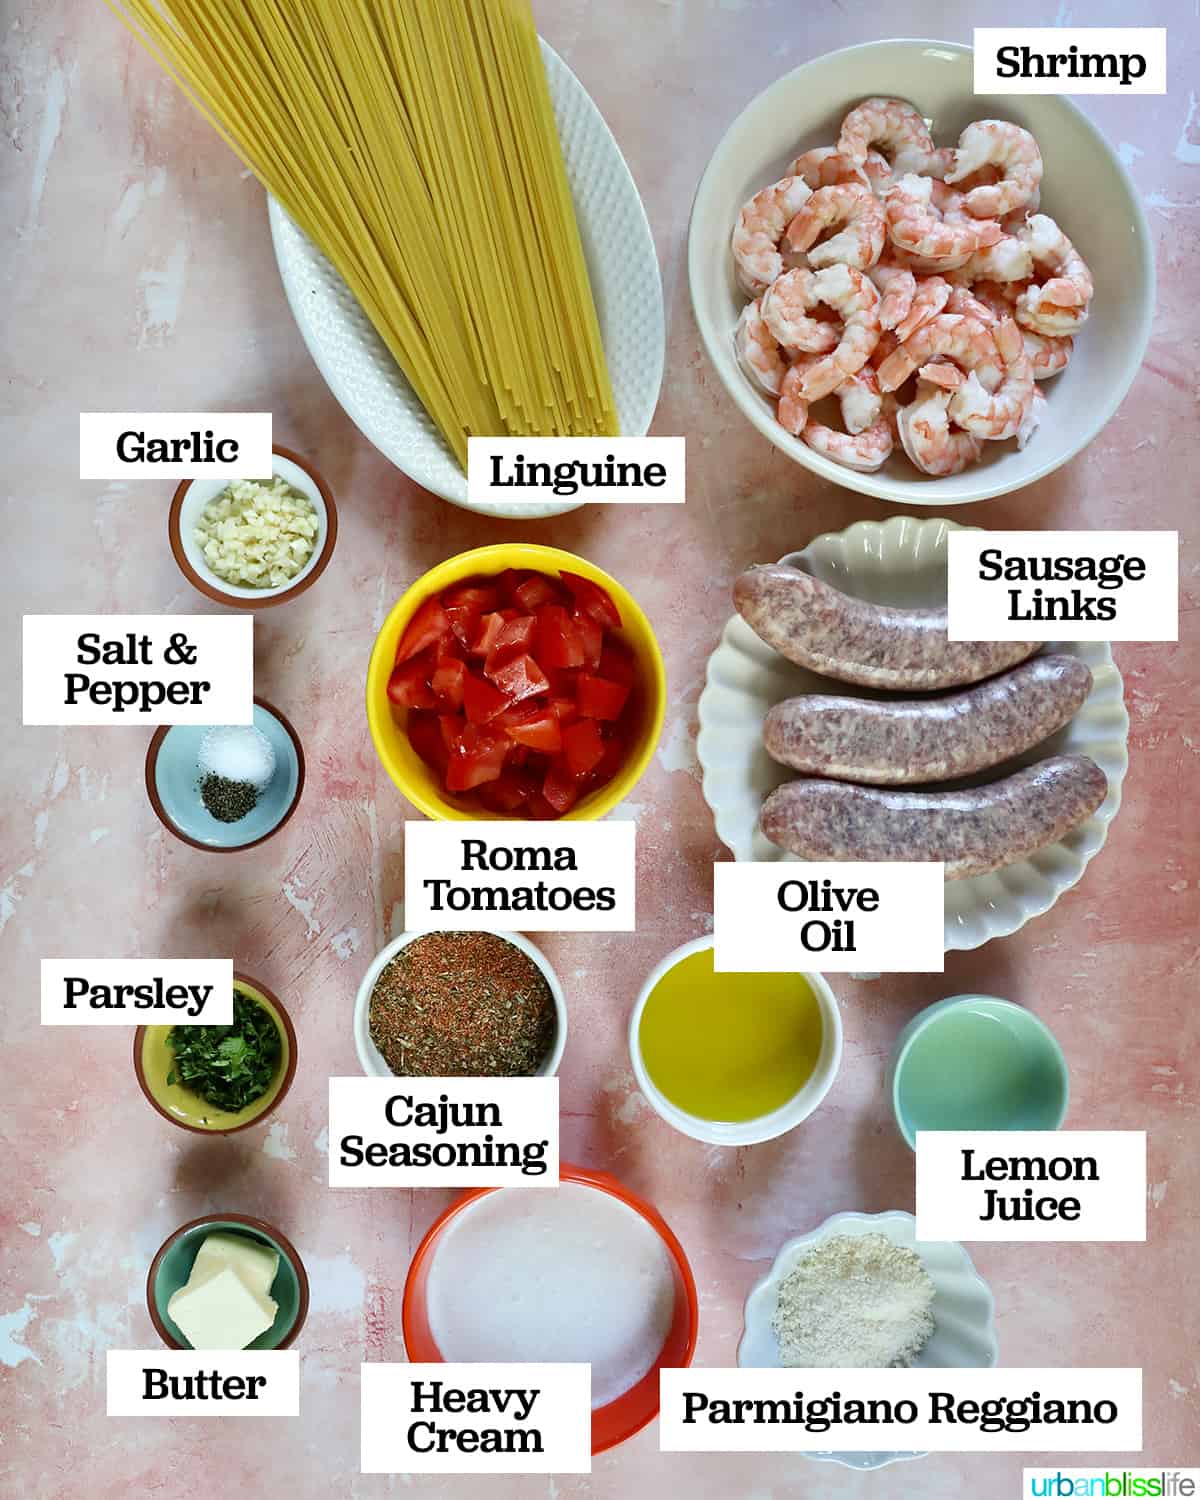 bowls and plates full of individual ingredients to make shrimp and sausage pasta.